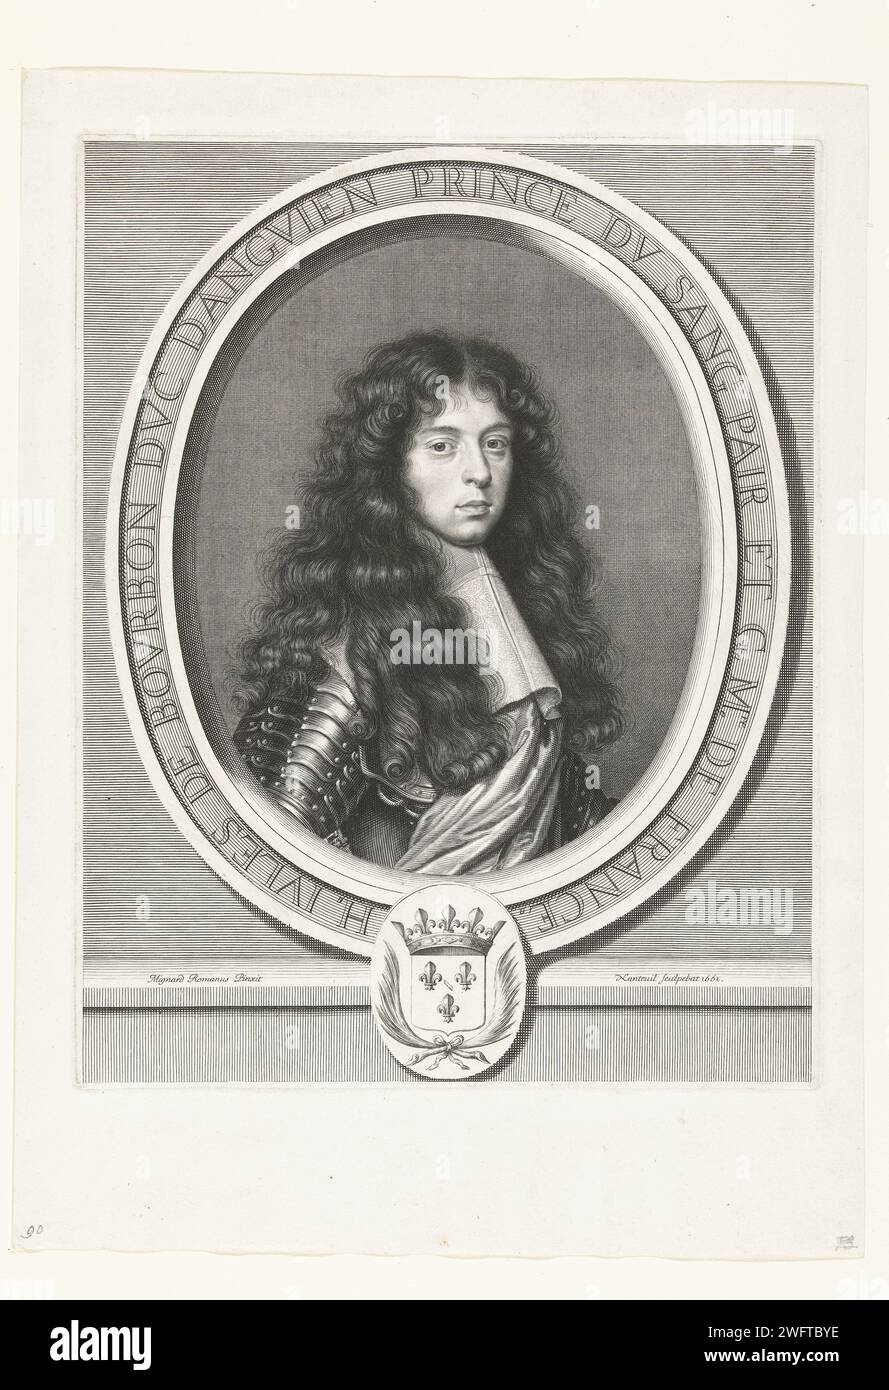 Portret van Henri-Jules de Bourbon-Condé, Robert Nanteuil, After Pierre Mignard (1612-1695), 1661 print Portrait of Henri-Jules de Bourbon-Condé, Duke of Enghien, in Harness. An oval frame with text, a coat of arms at the bottom. France paper engraving Stock Photo